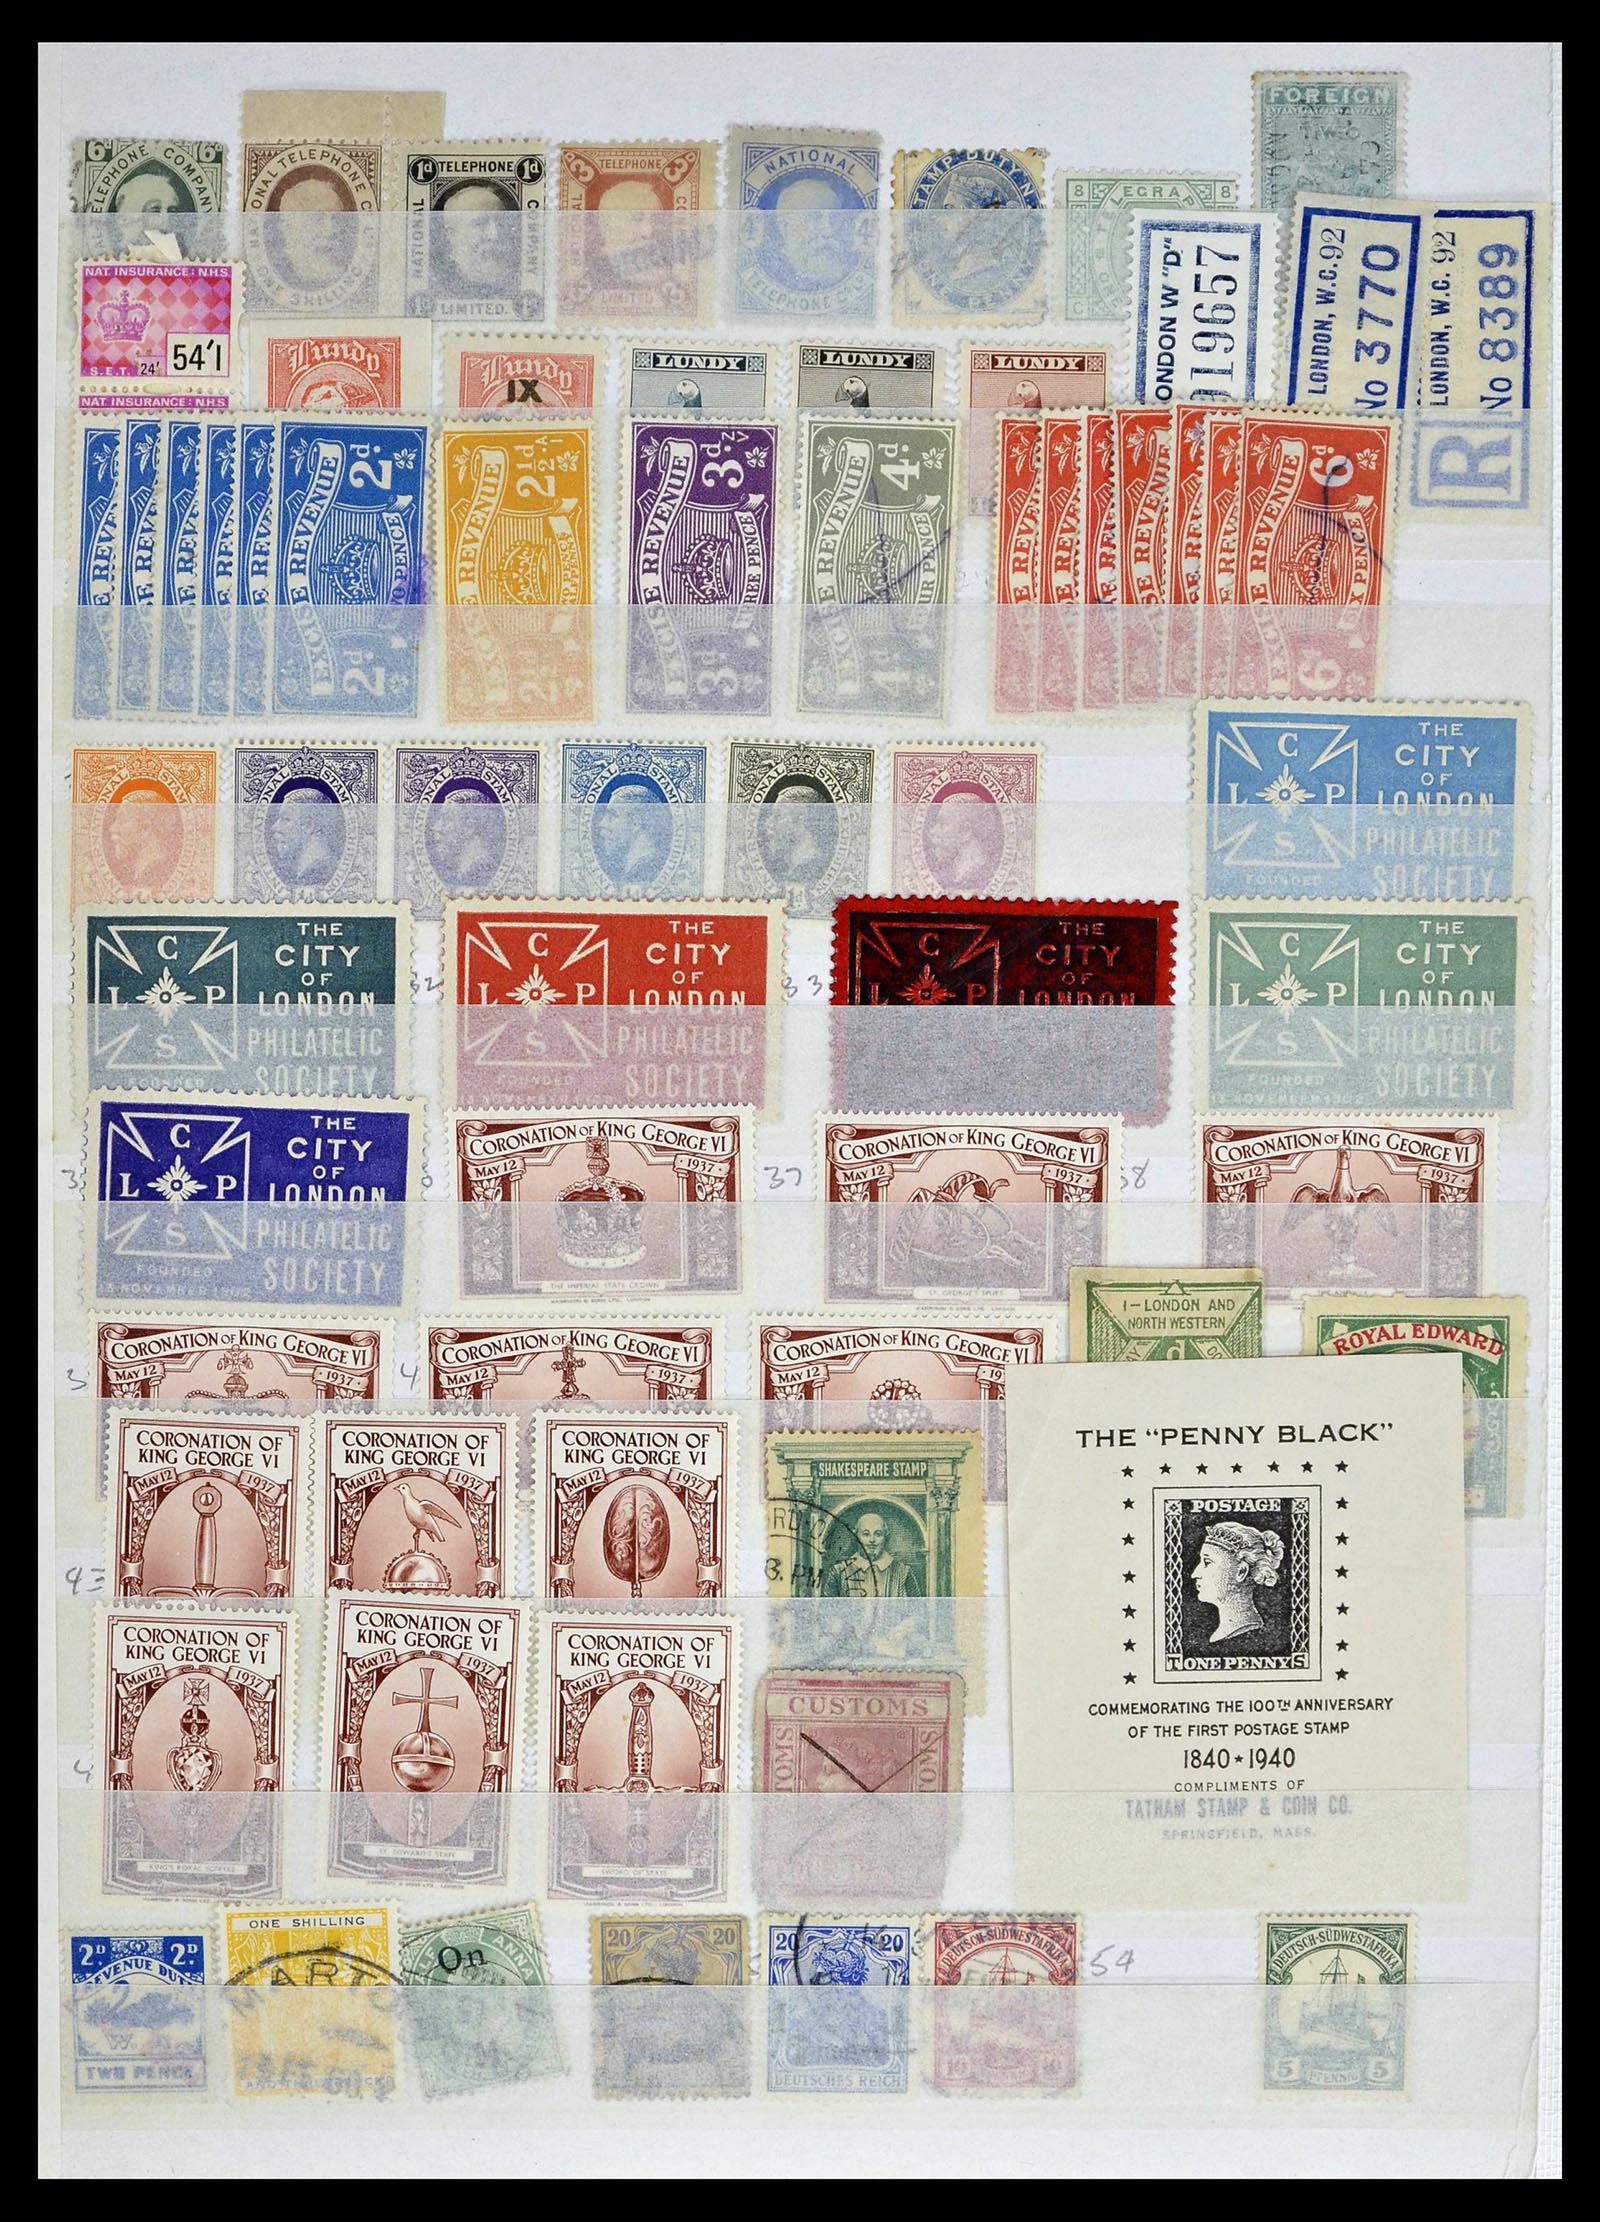 39196 0068 - Stamp collection 39196 Great Britain 1844-1955.